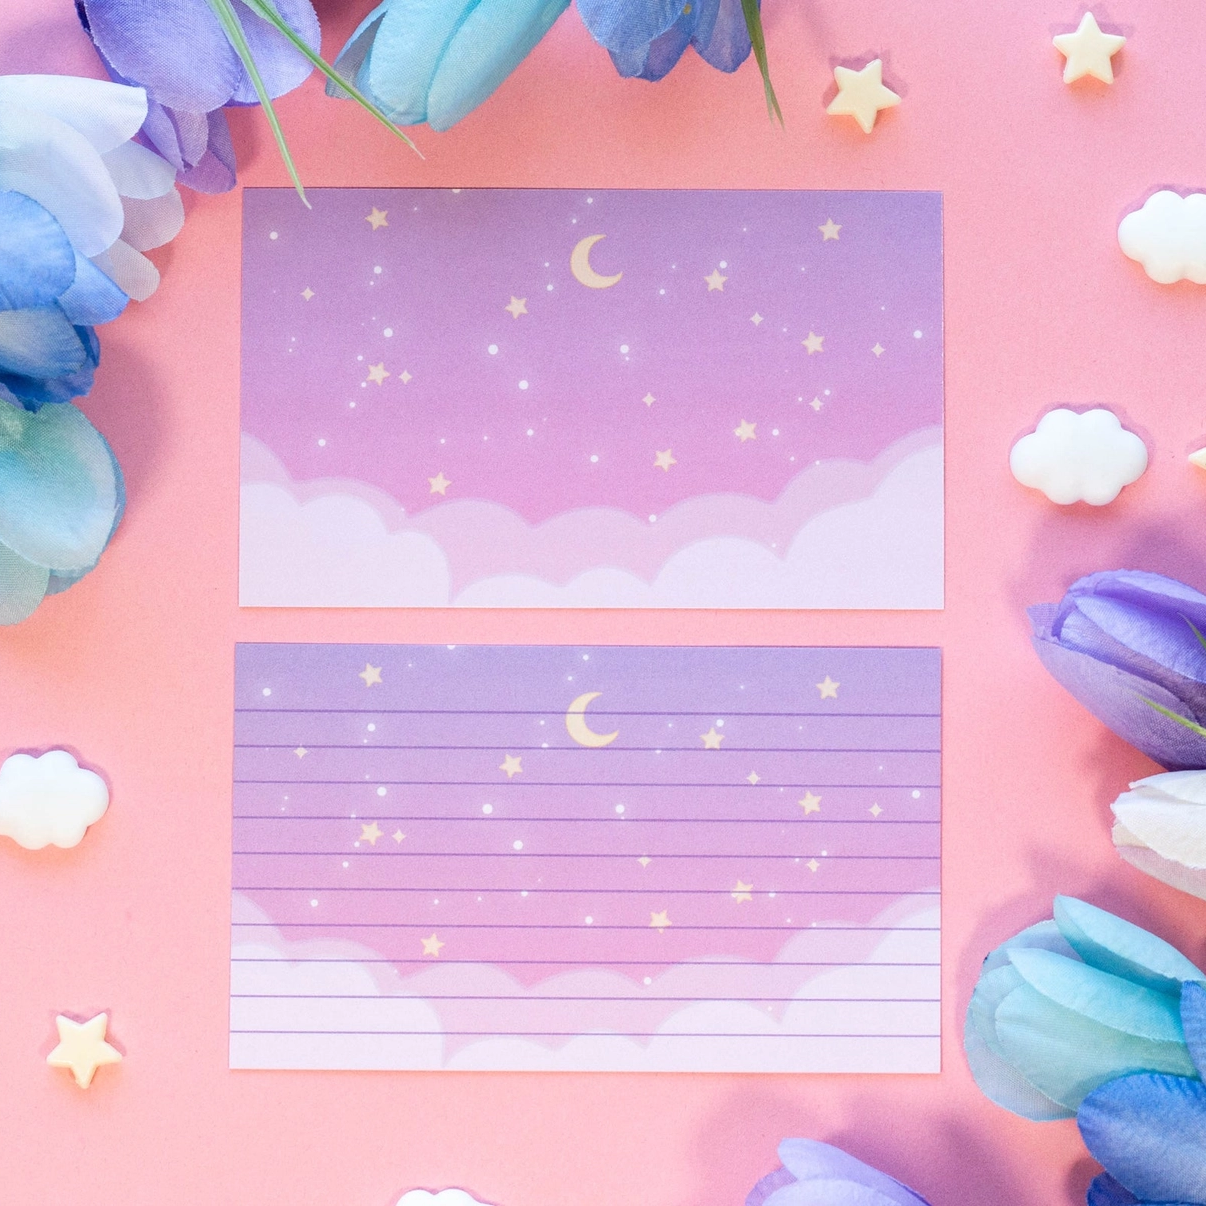 Unicorn Eclipse: "Starry Clouds " Note Cards